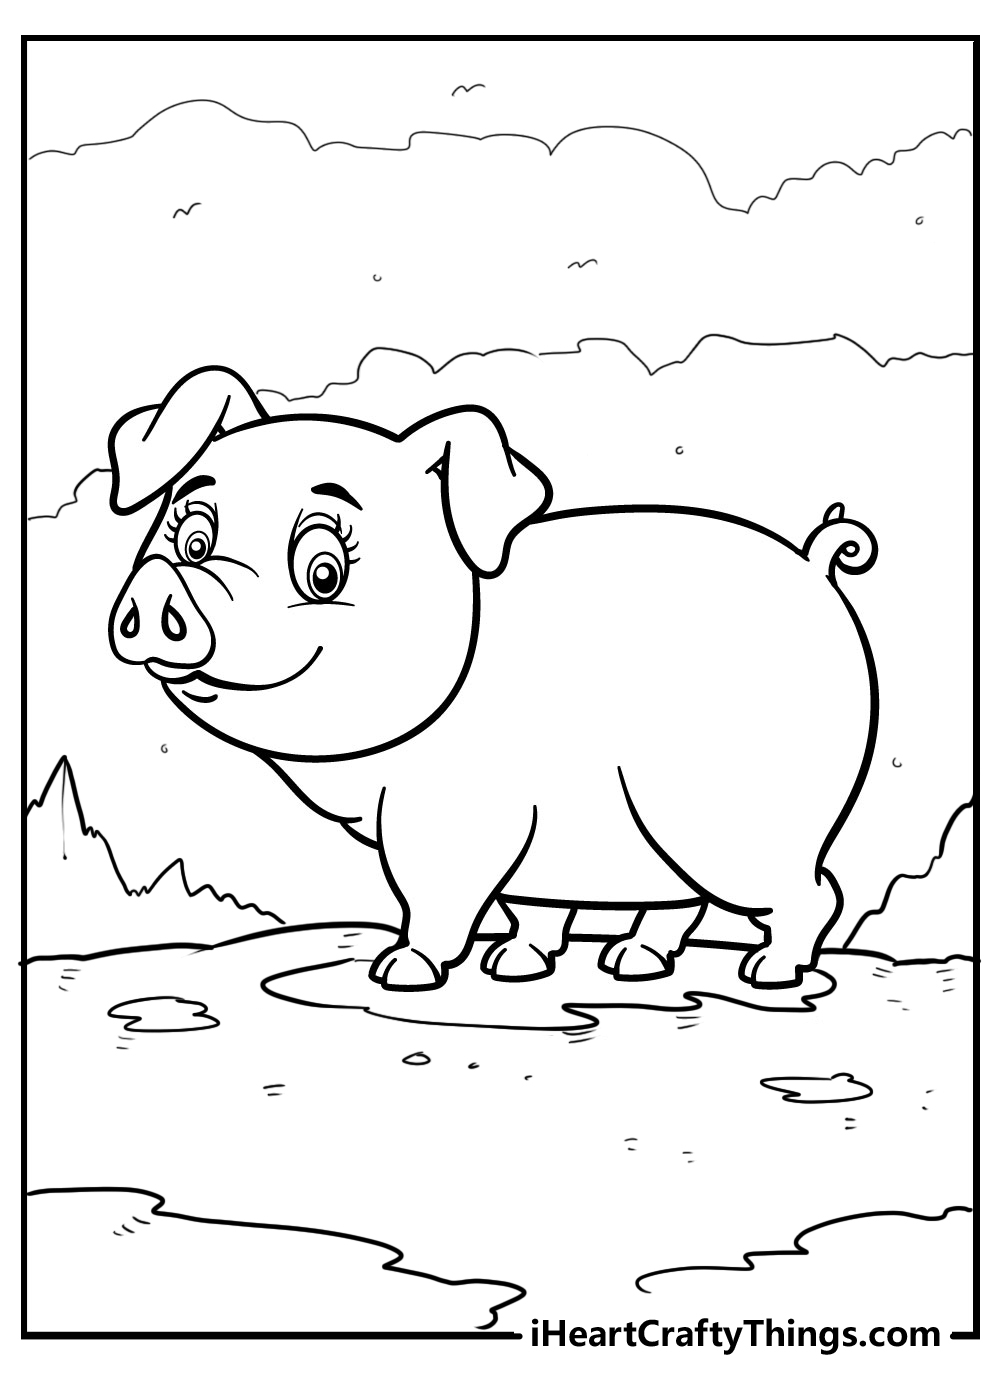 Pig Coloring Pages Updated 20